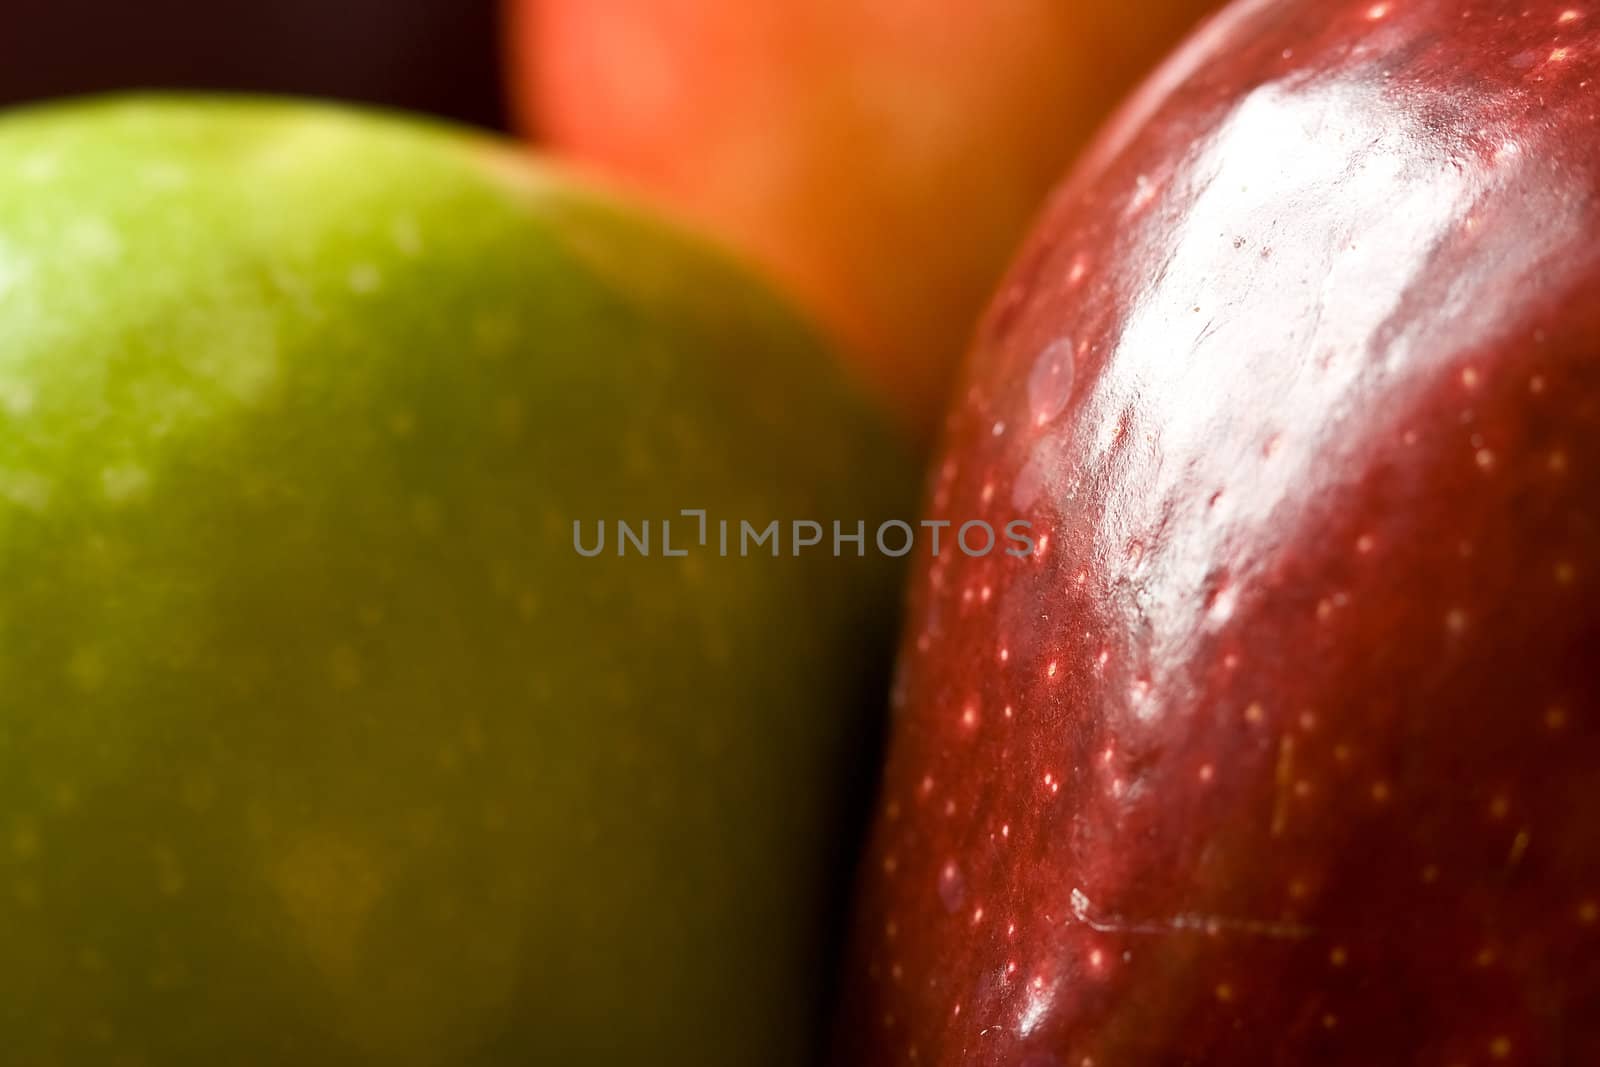 macro shot of fresh ripe apples washed with water